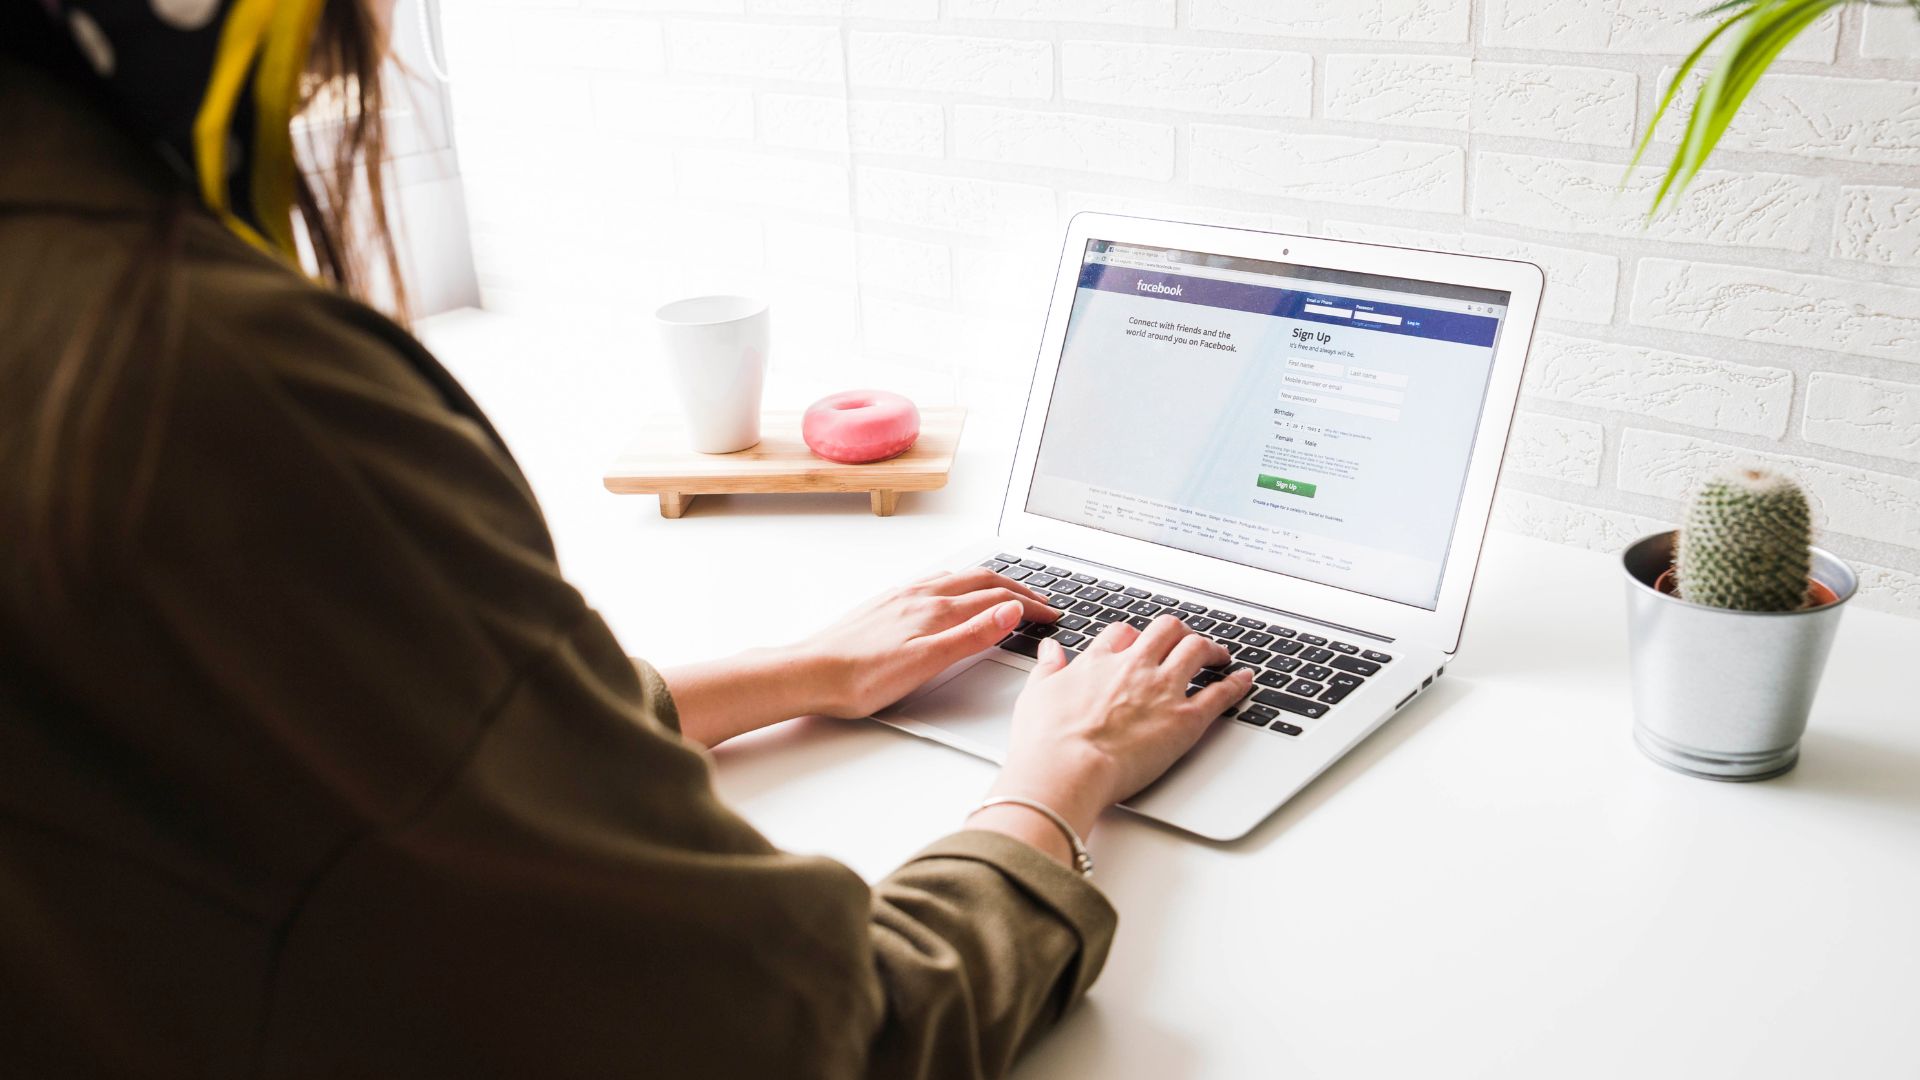 How to Turn on Login Approvals on Facebook